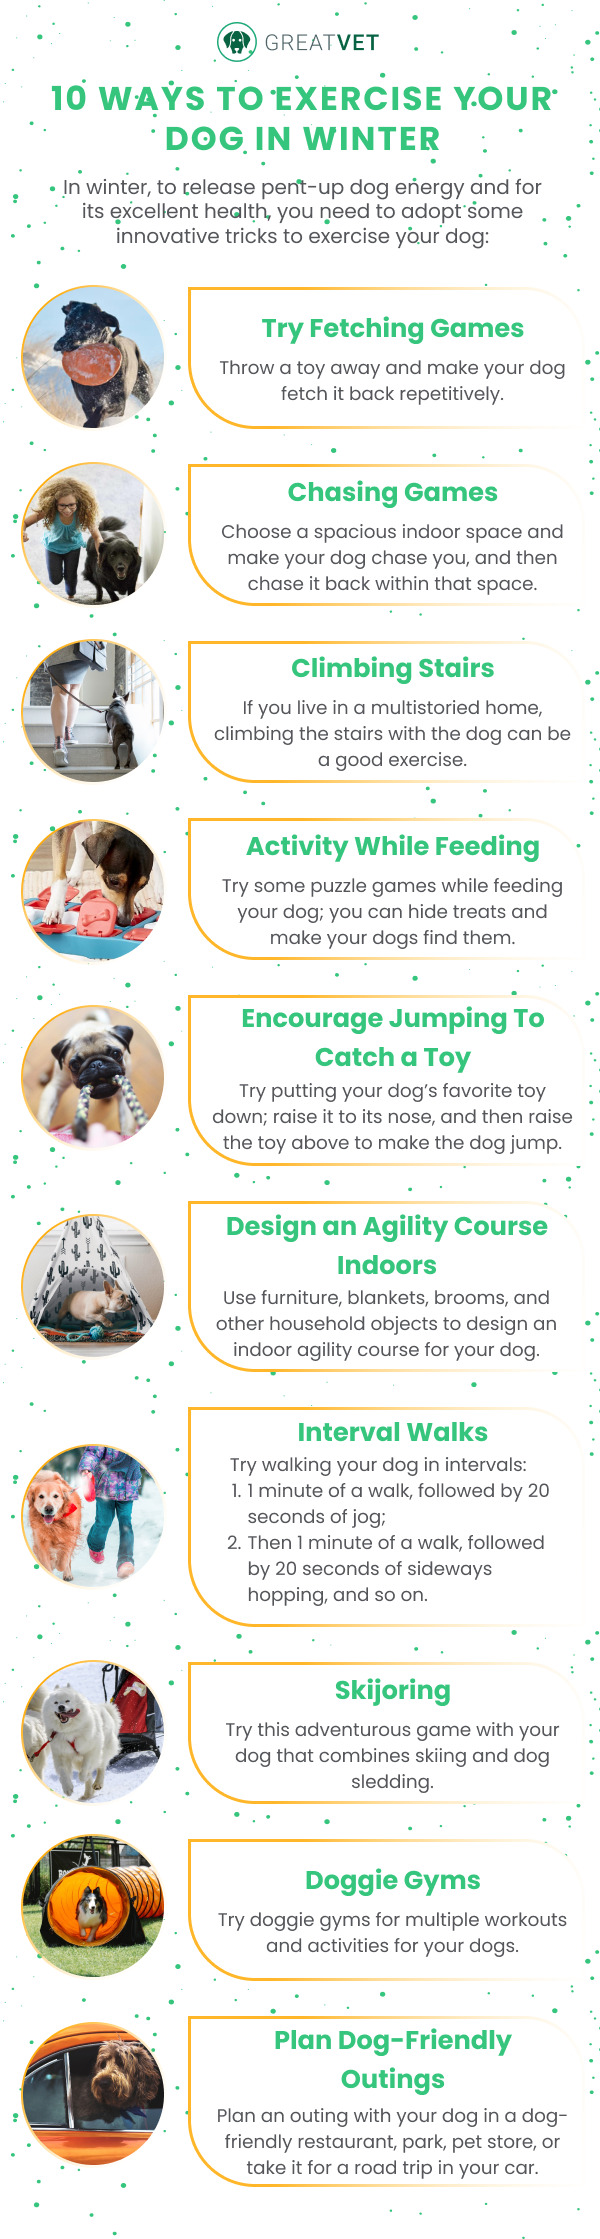 10 Ways to Exercise Your Dog in Winter